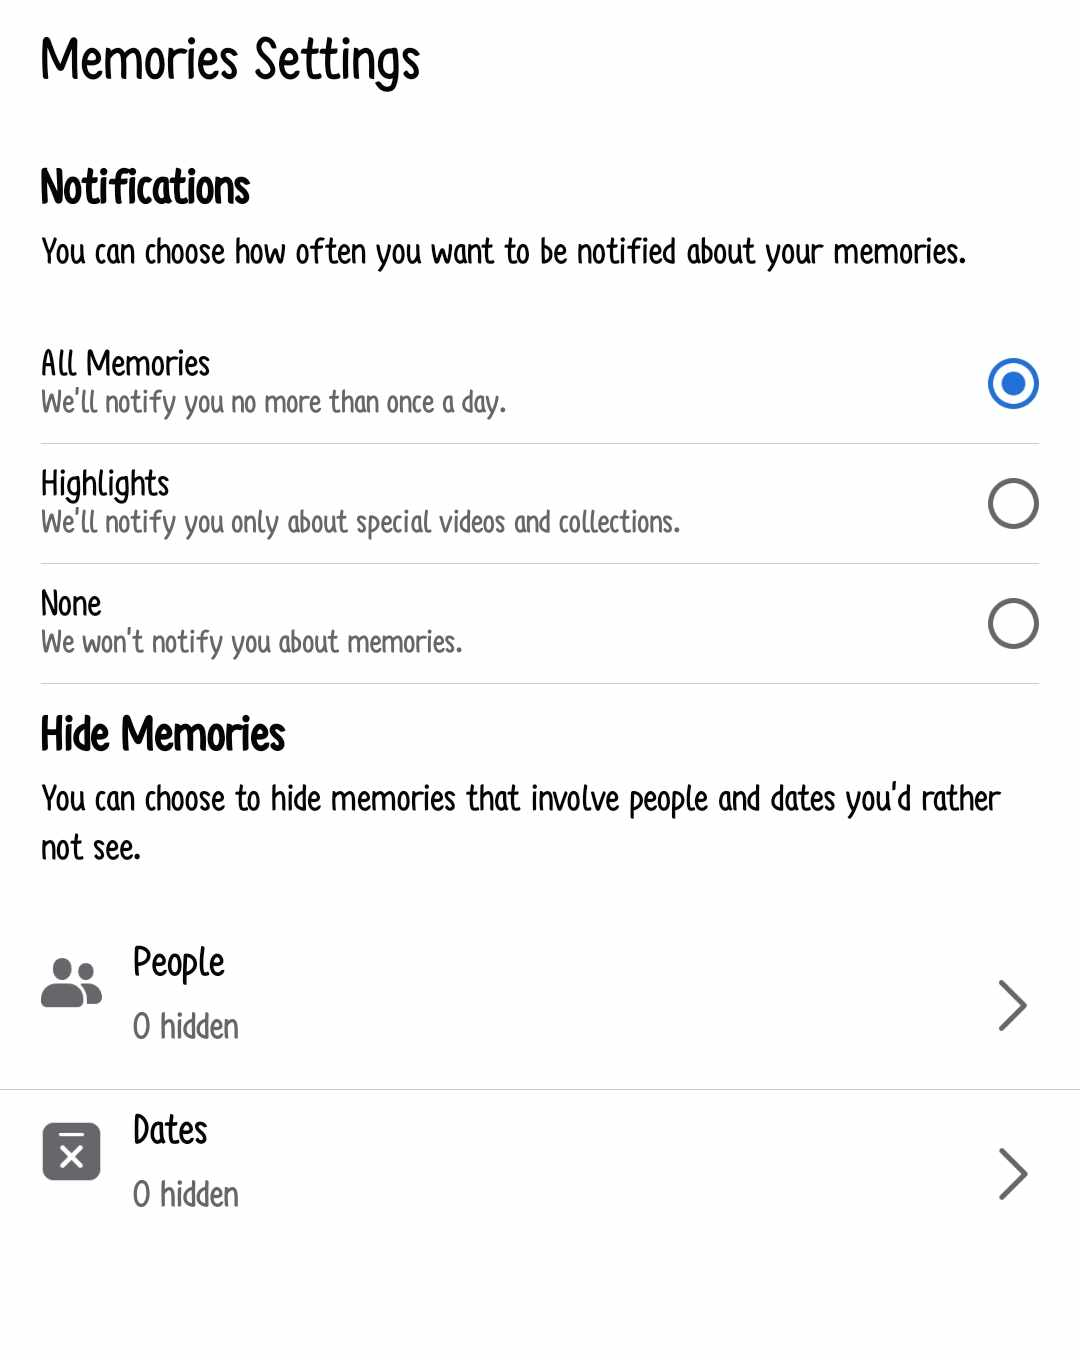 Manage Notifications of Memories